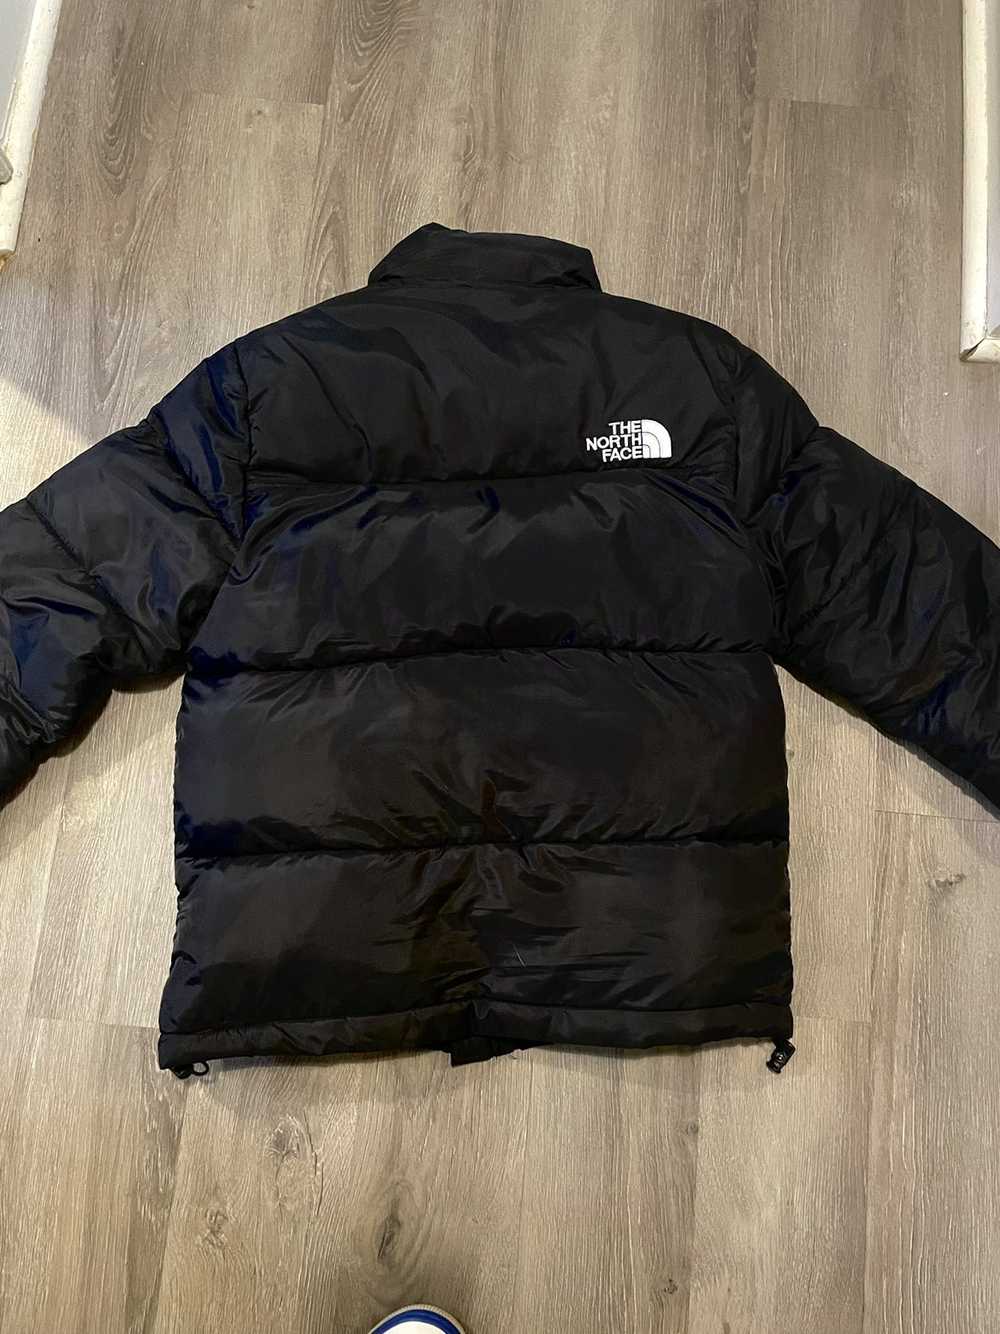 The North Face The North Face Nuptse 700 Jacket - image 2